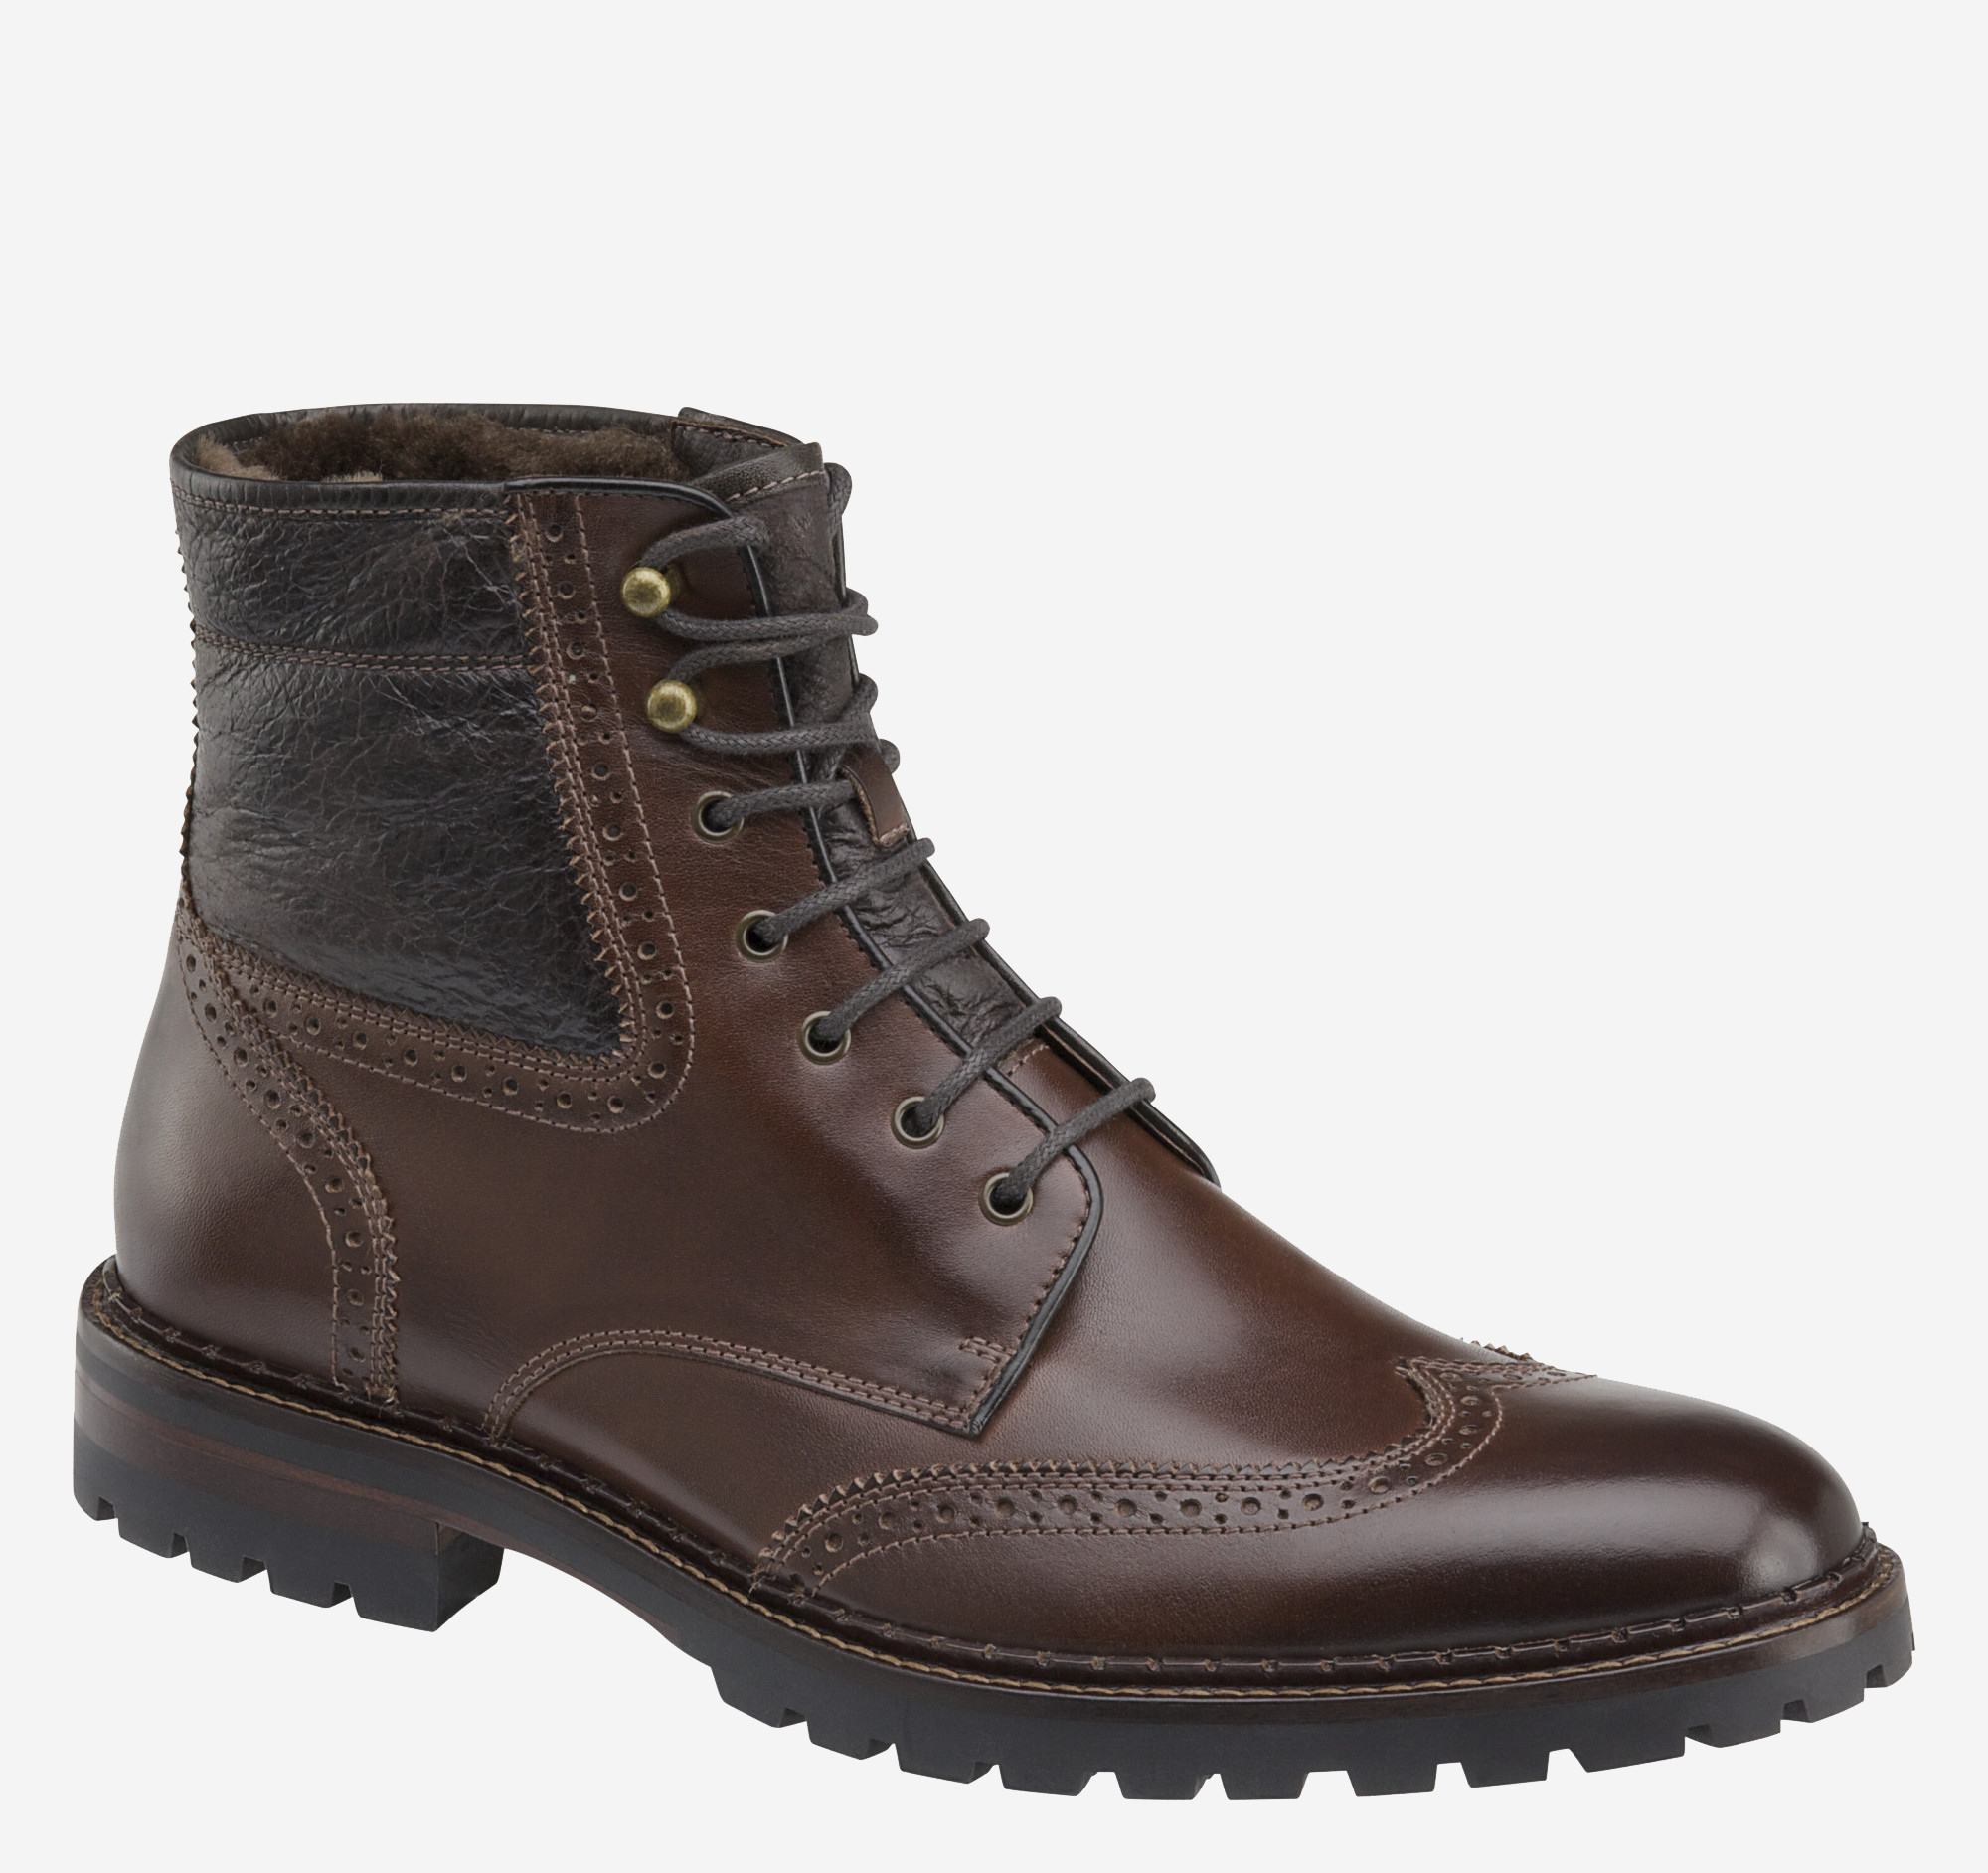 johnston and murphy winter boots